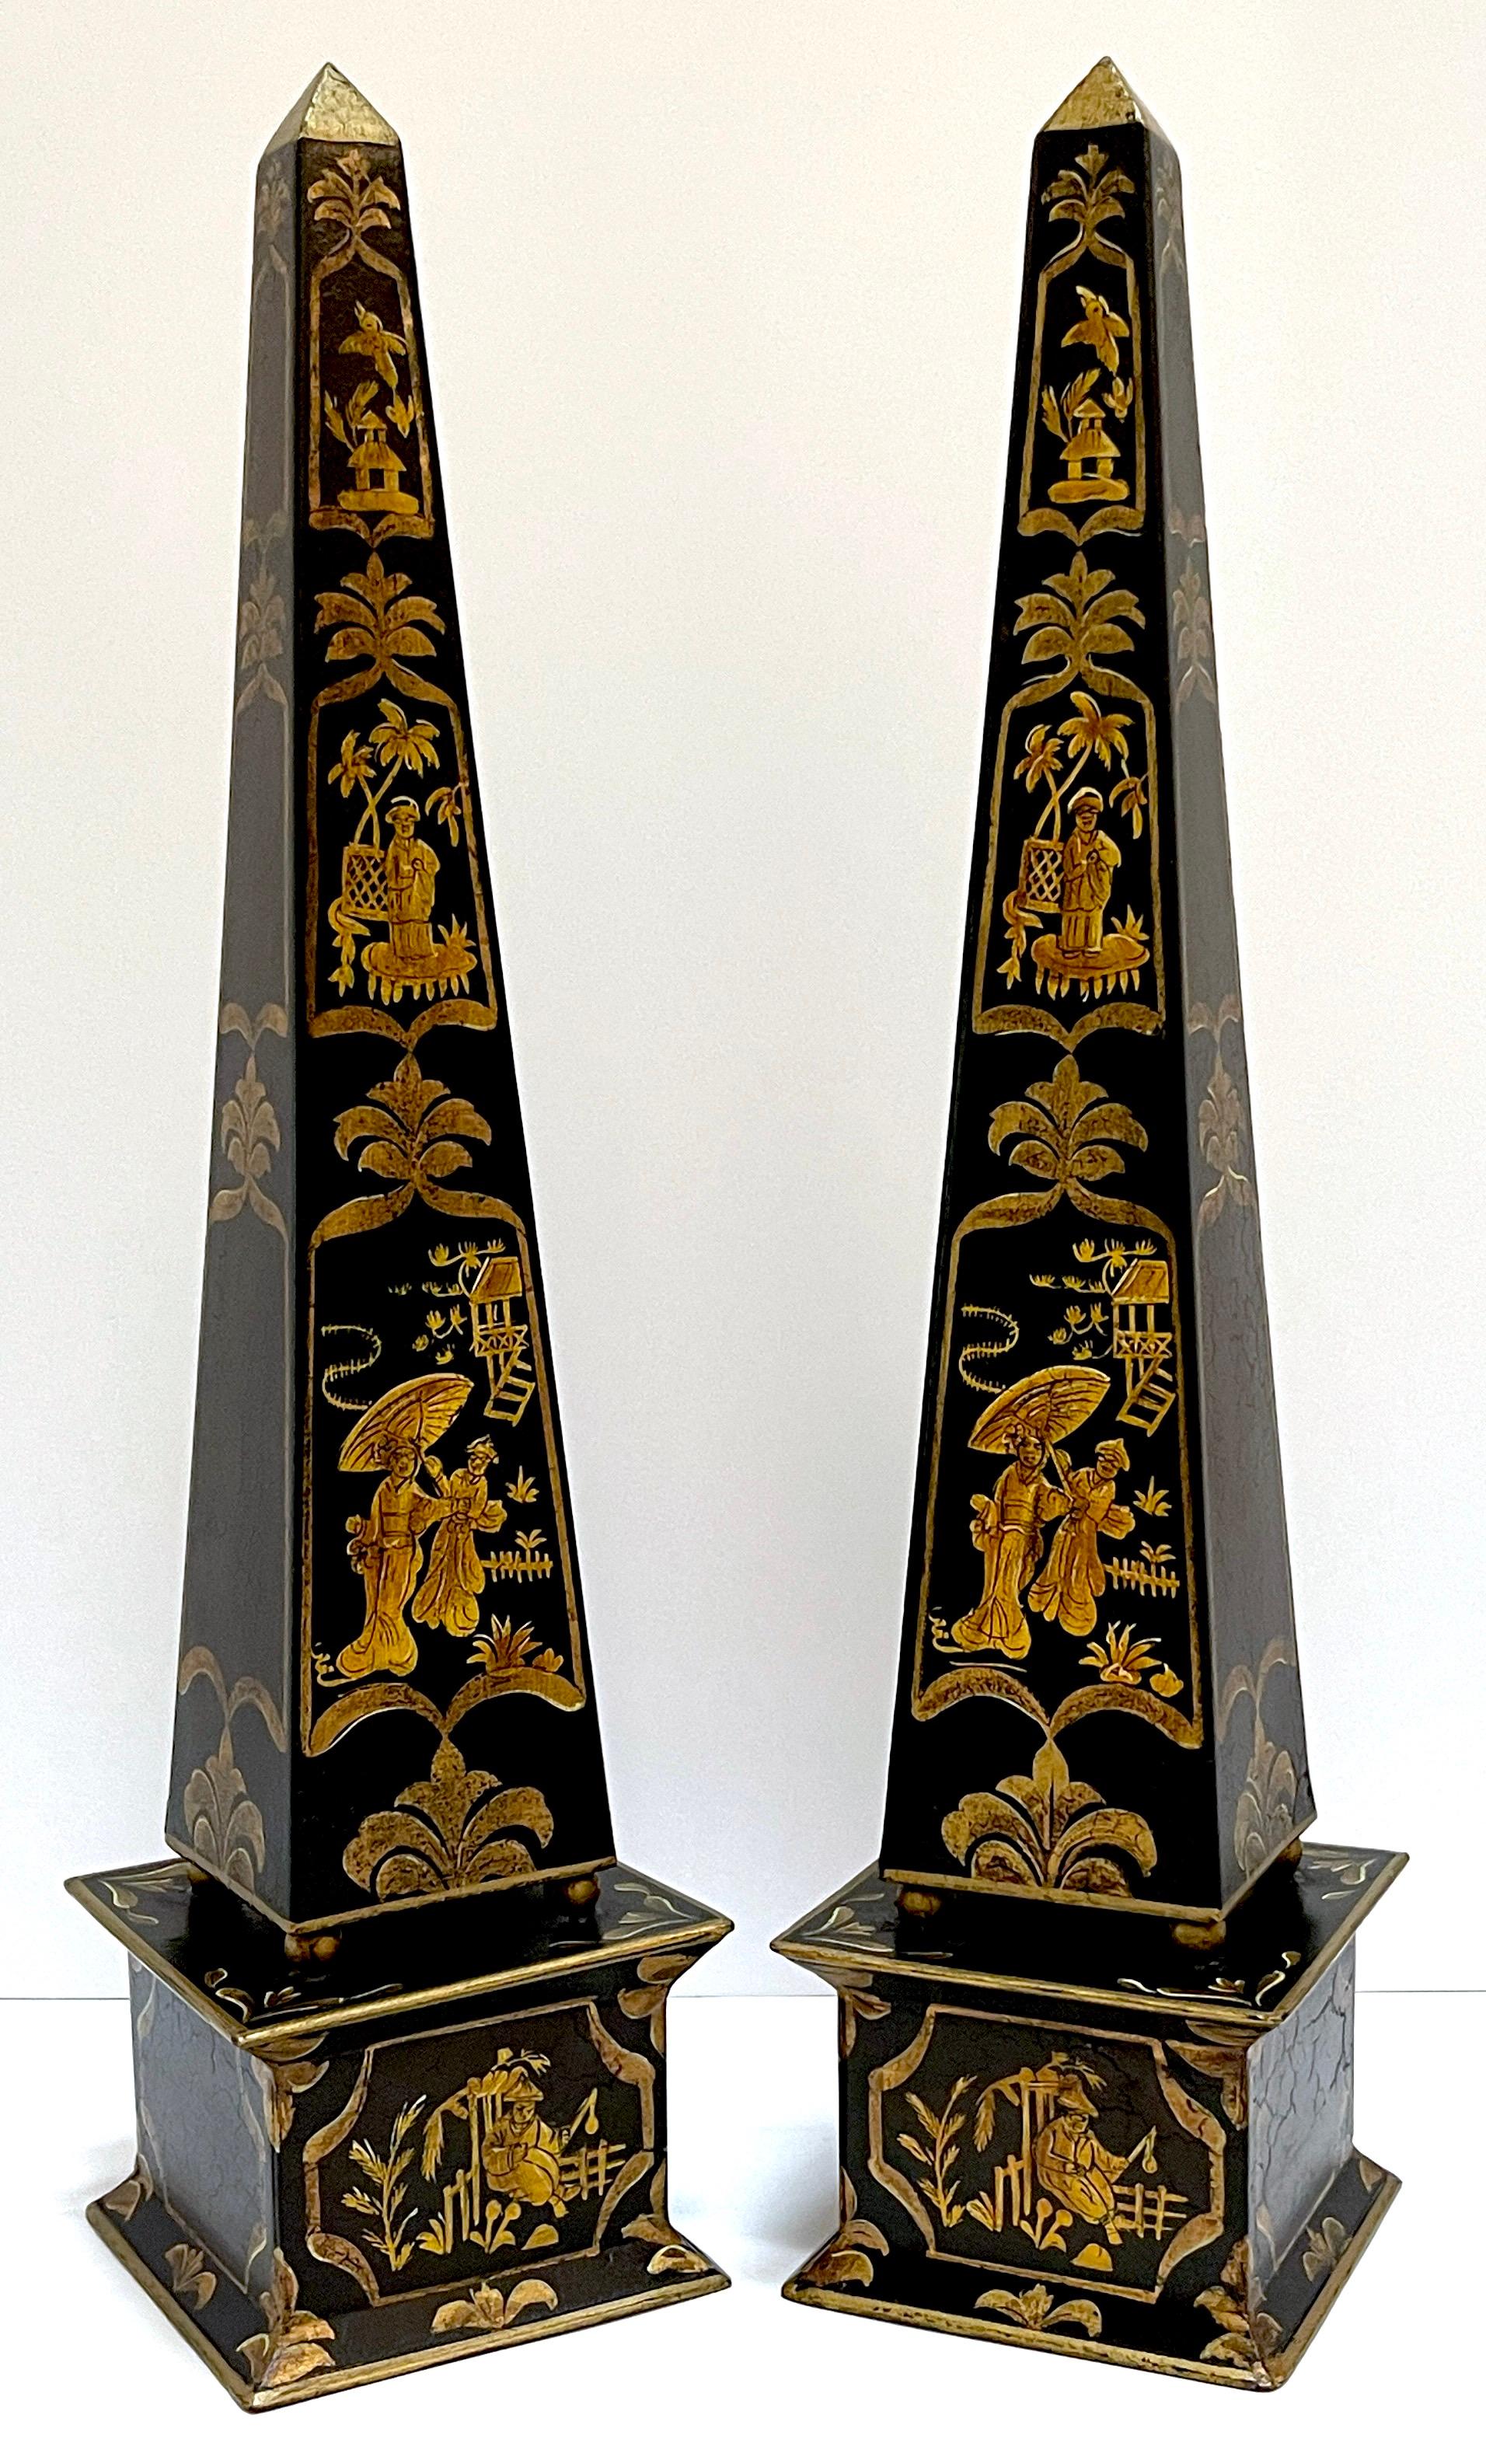 Pair of French Gilt & Enameled Decorated Chinoiserie Tole Obelisks  
France, 20th Century 

A stunning pair of French gilt and enameled decorated chinoiserie tole obelisks from the 20th century. These obelisks are truly a sight to behold, showcasing